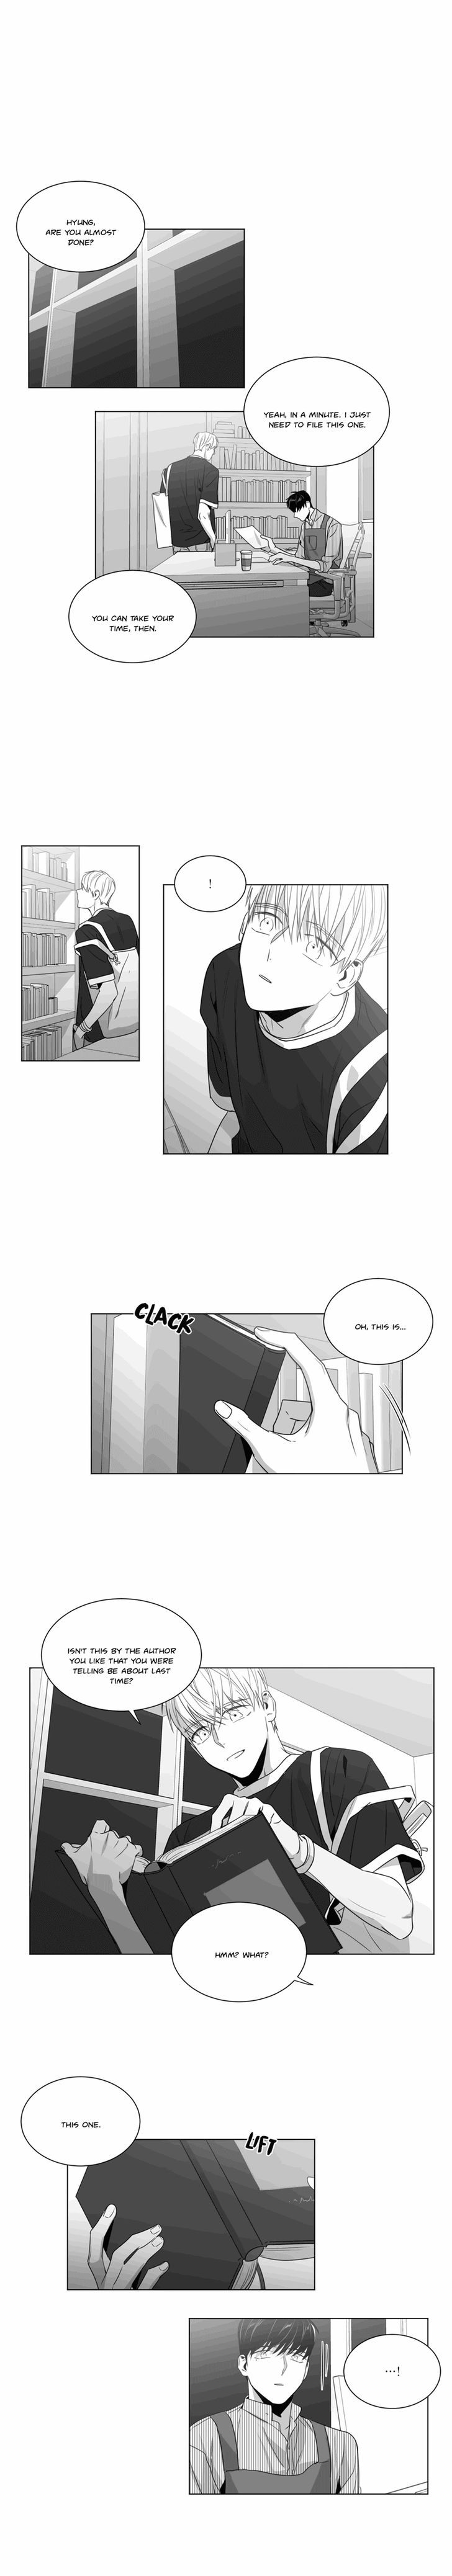 Lover Boy (Lezhin) Chapter 036 page 11